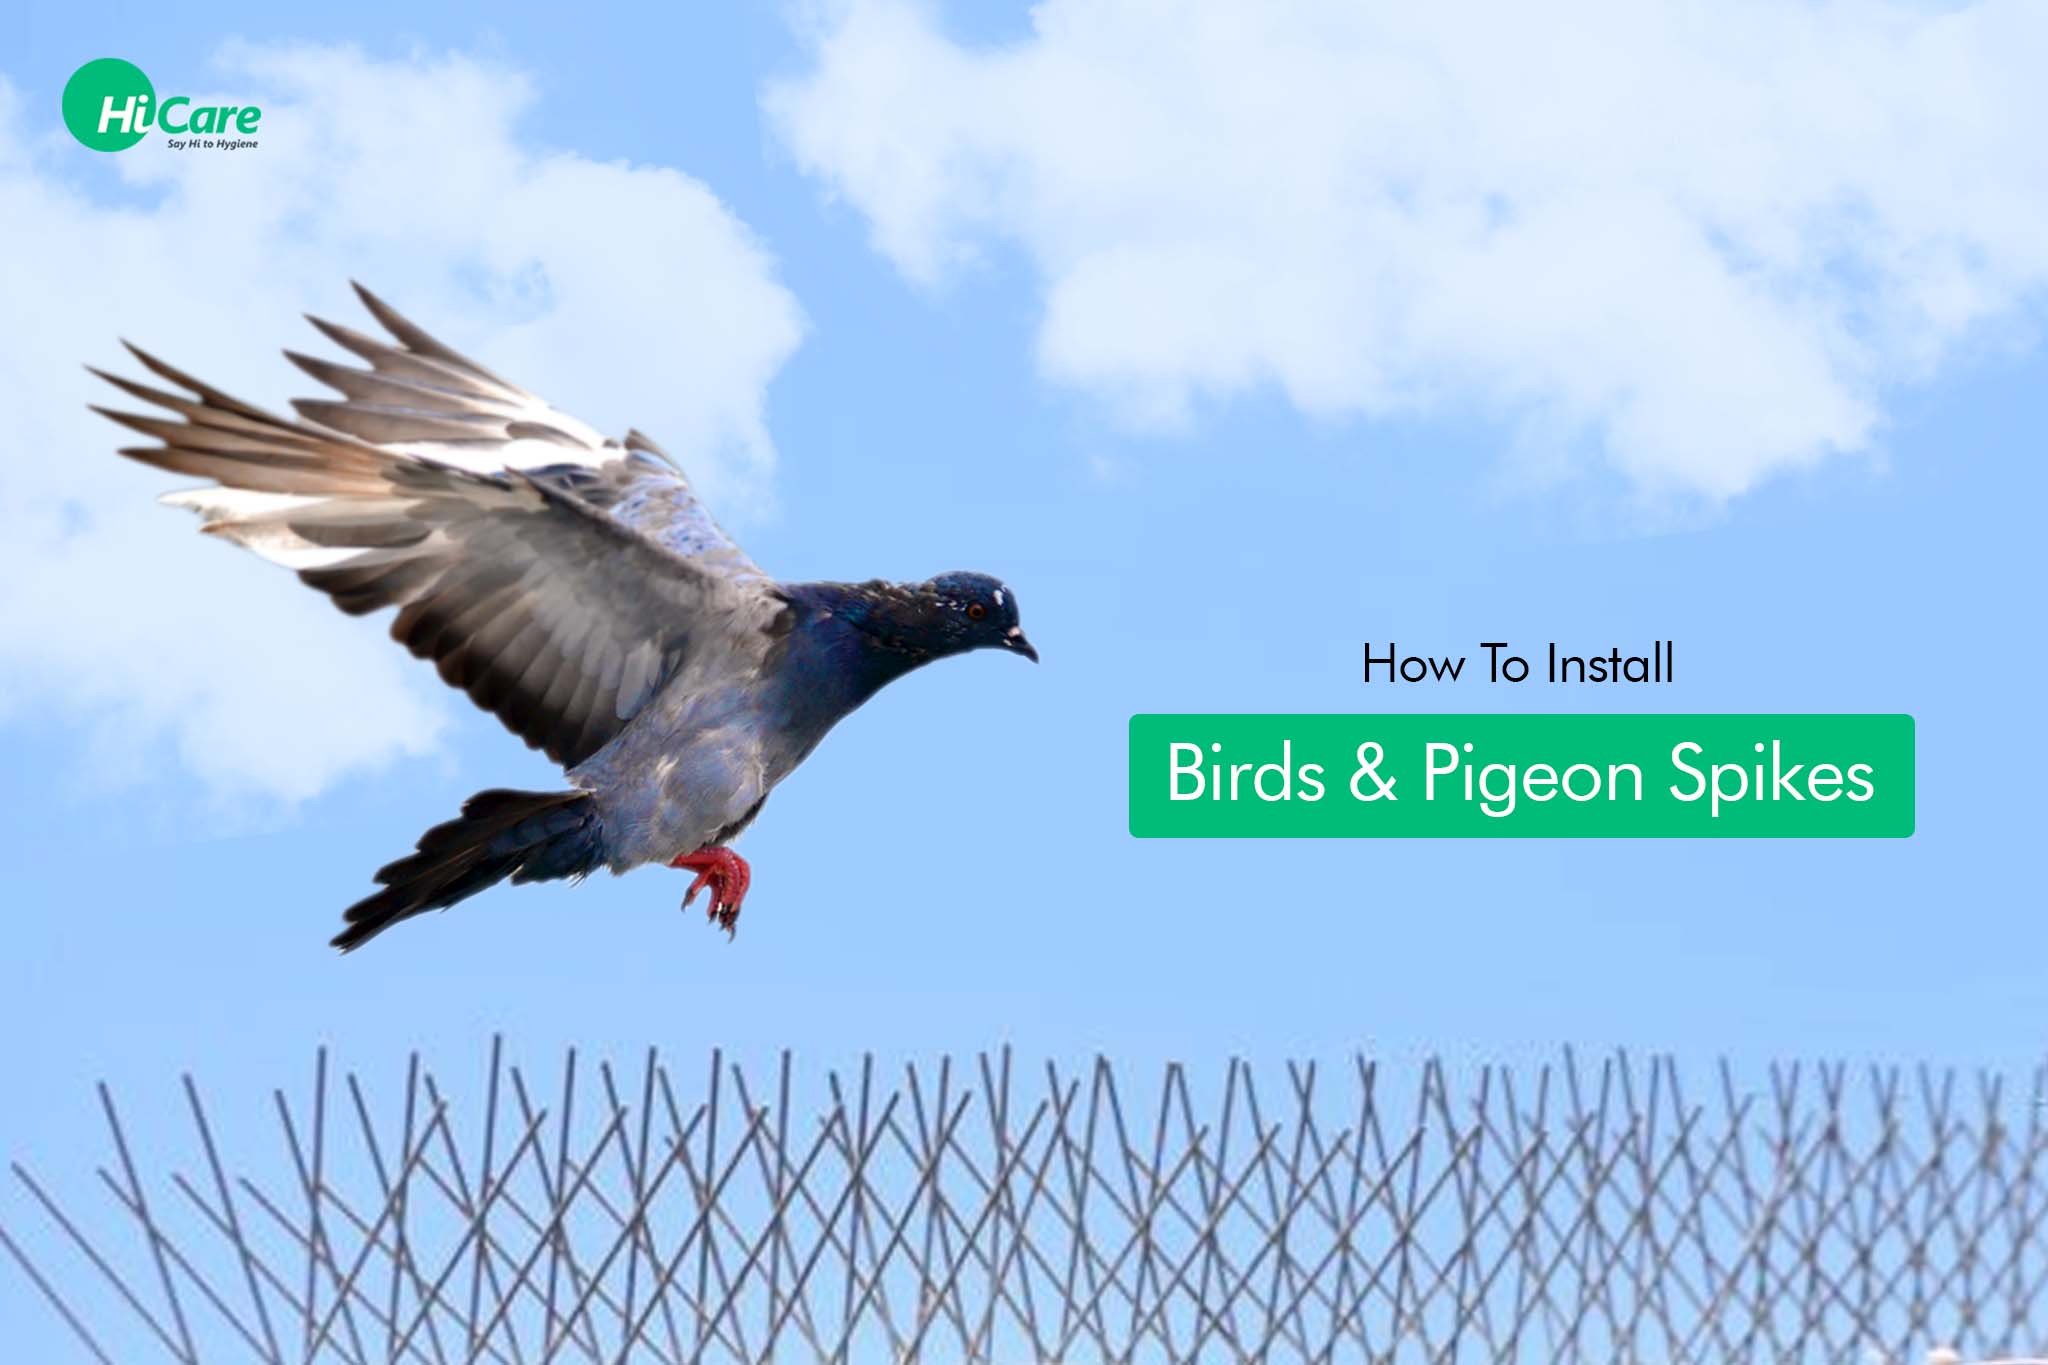 how to install birds & pigeon spikes